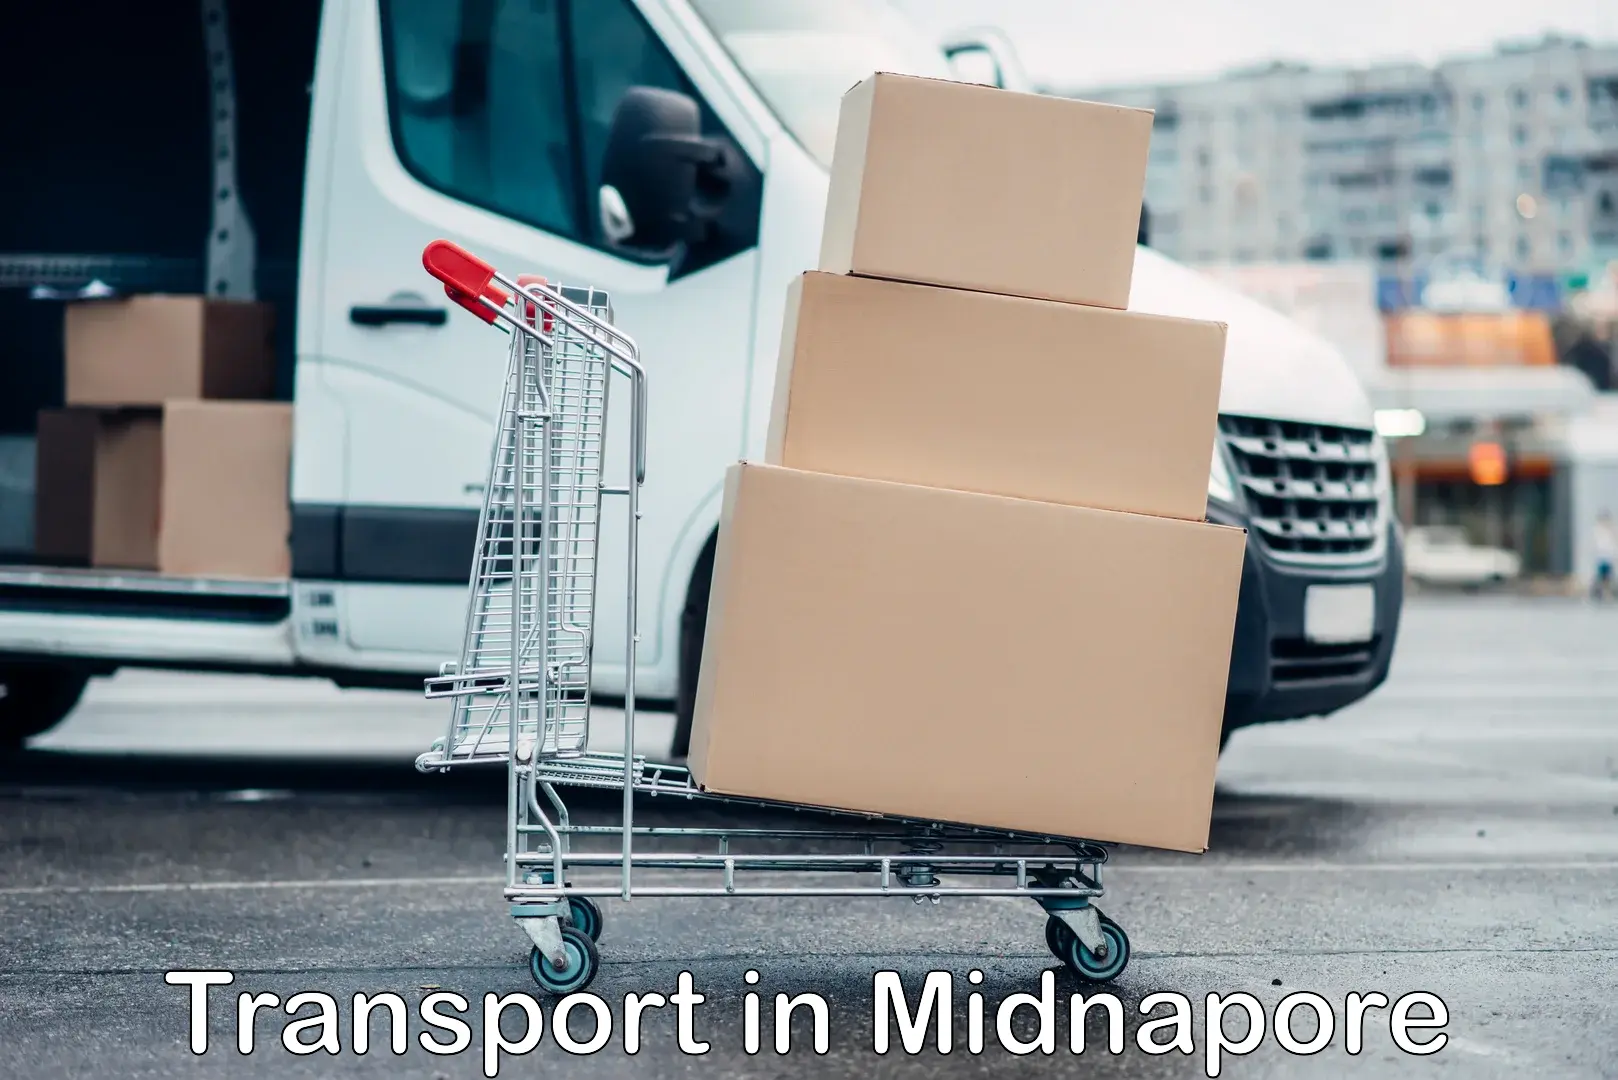 Nearest transport service in Midnapore